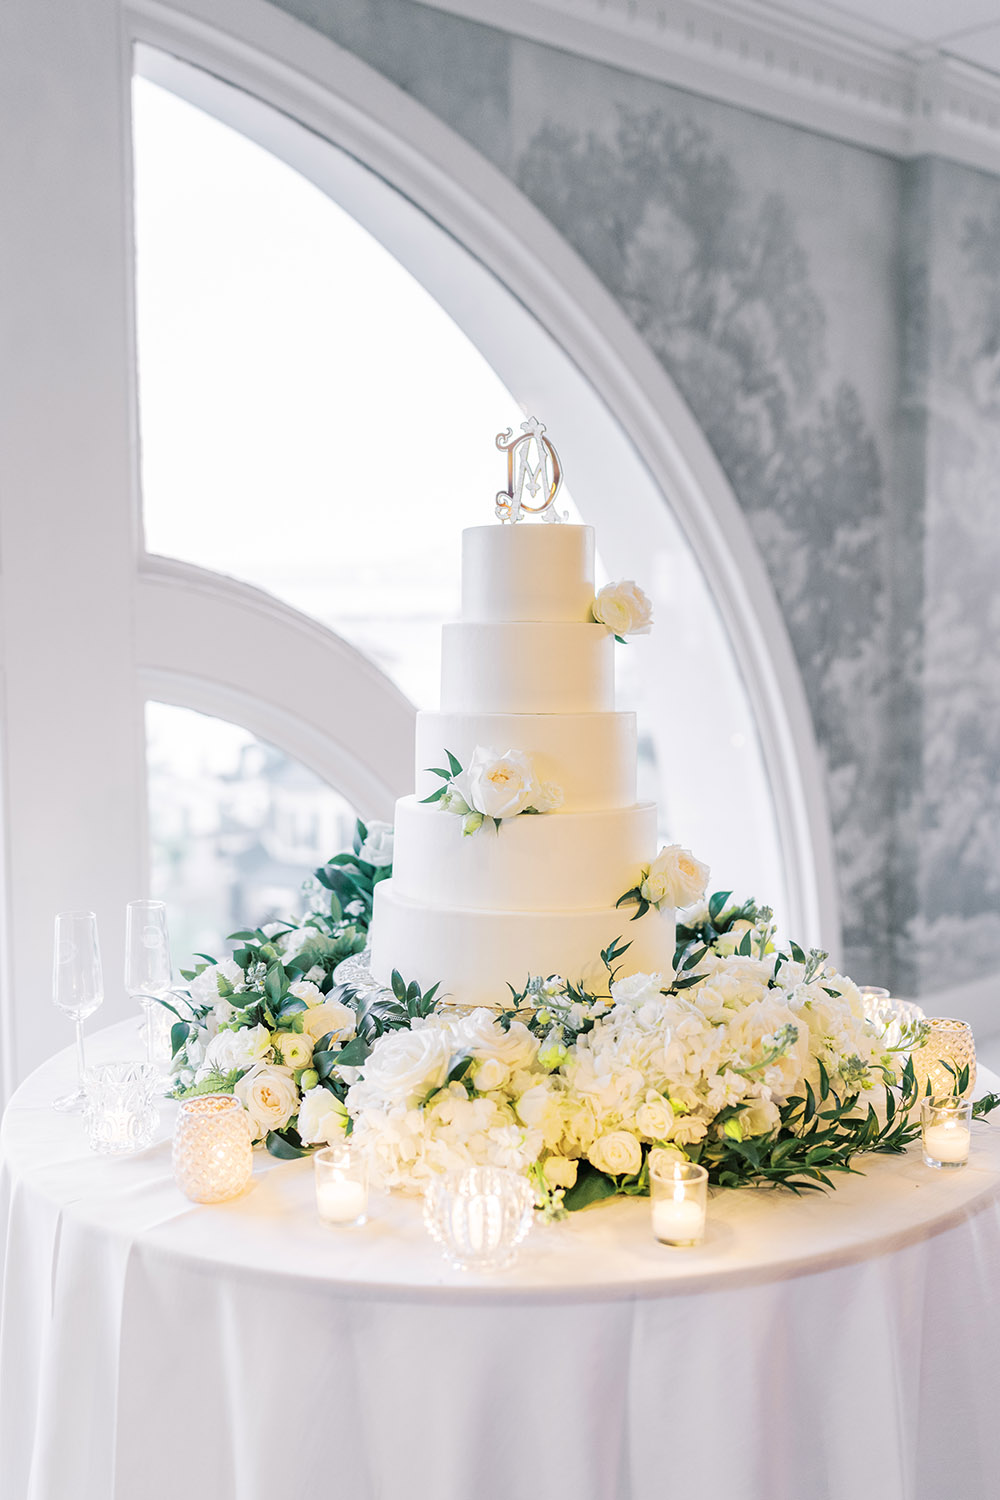 white wedding cake surrounded by flowers